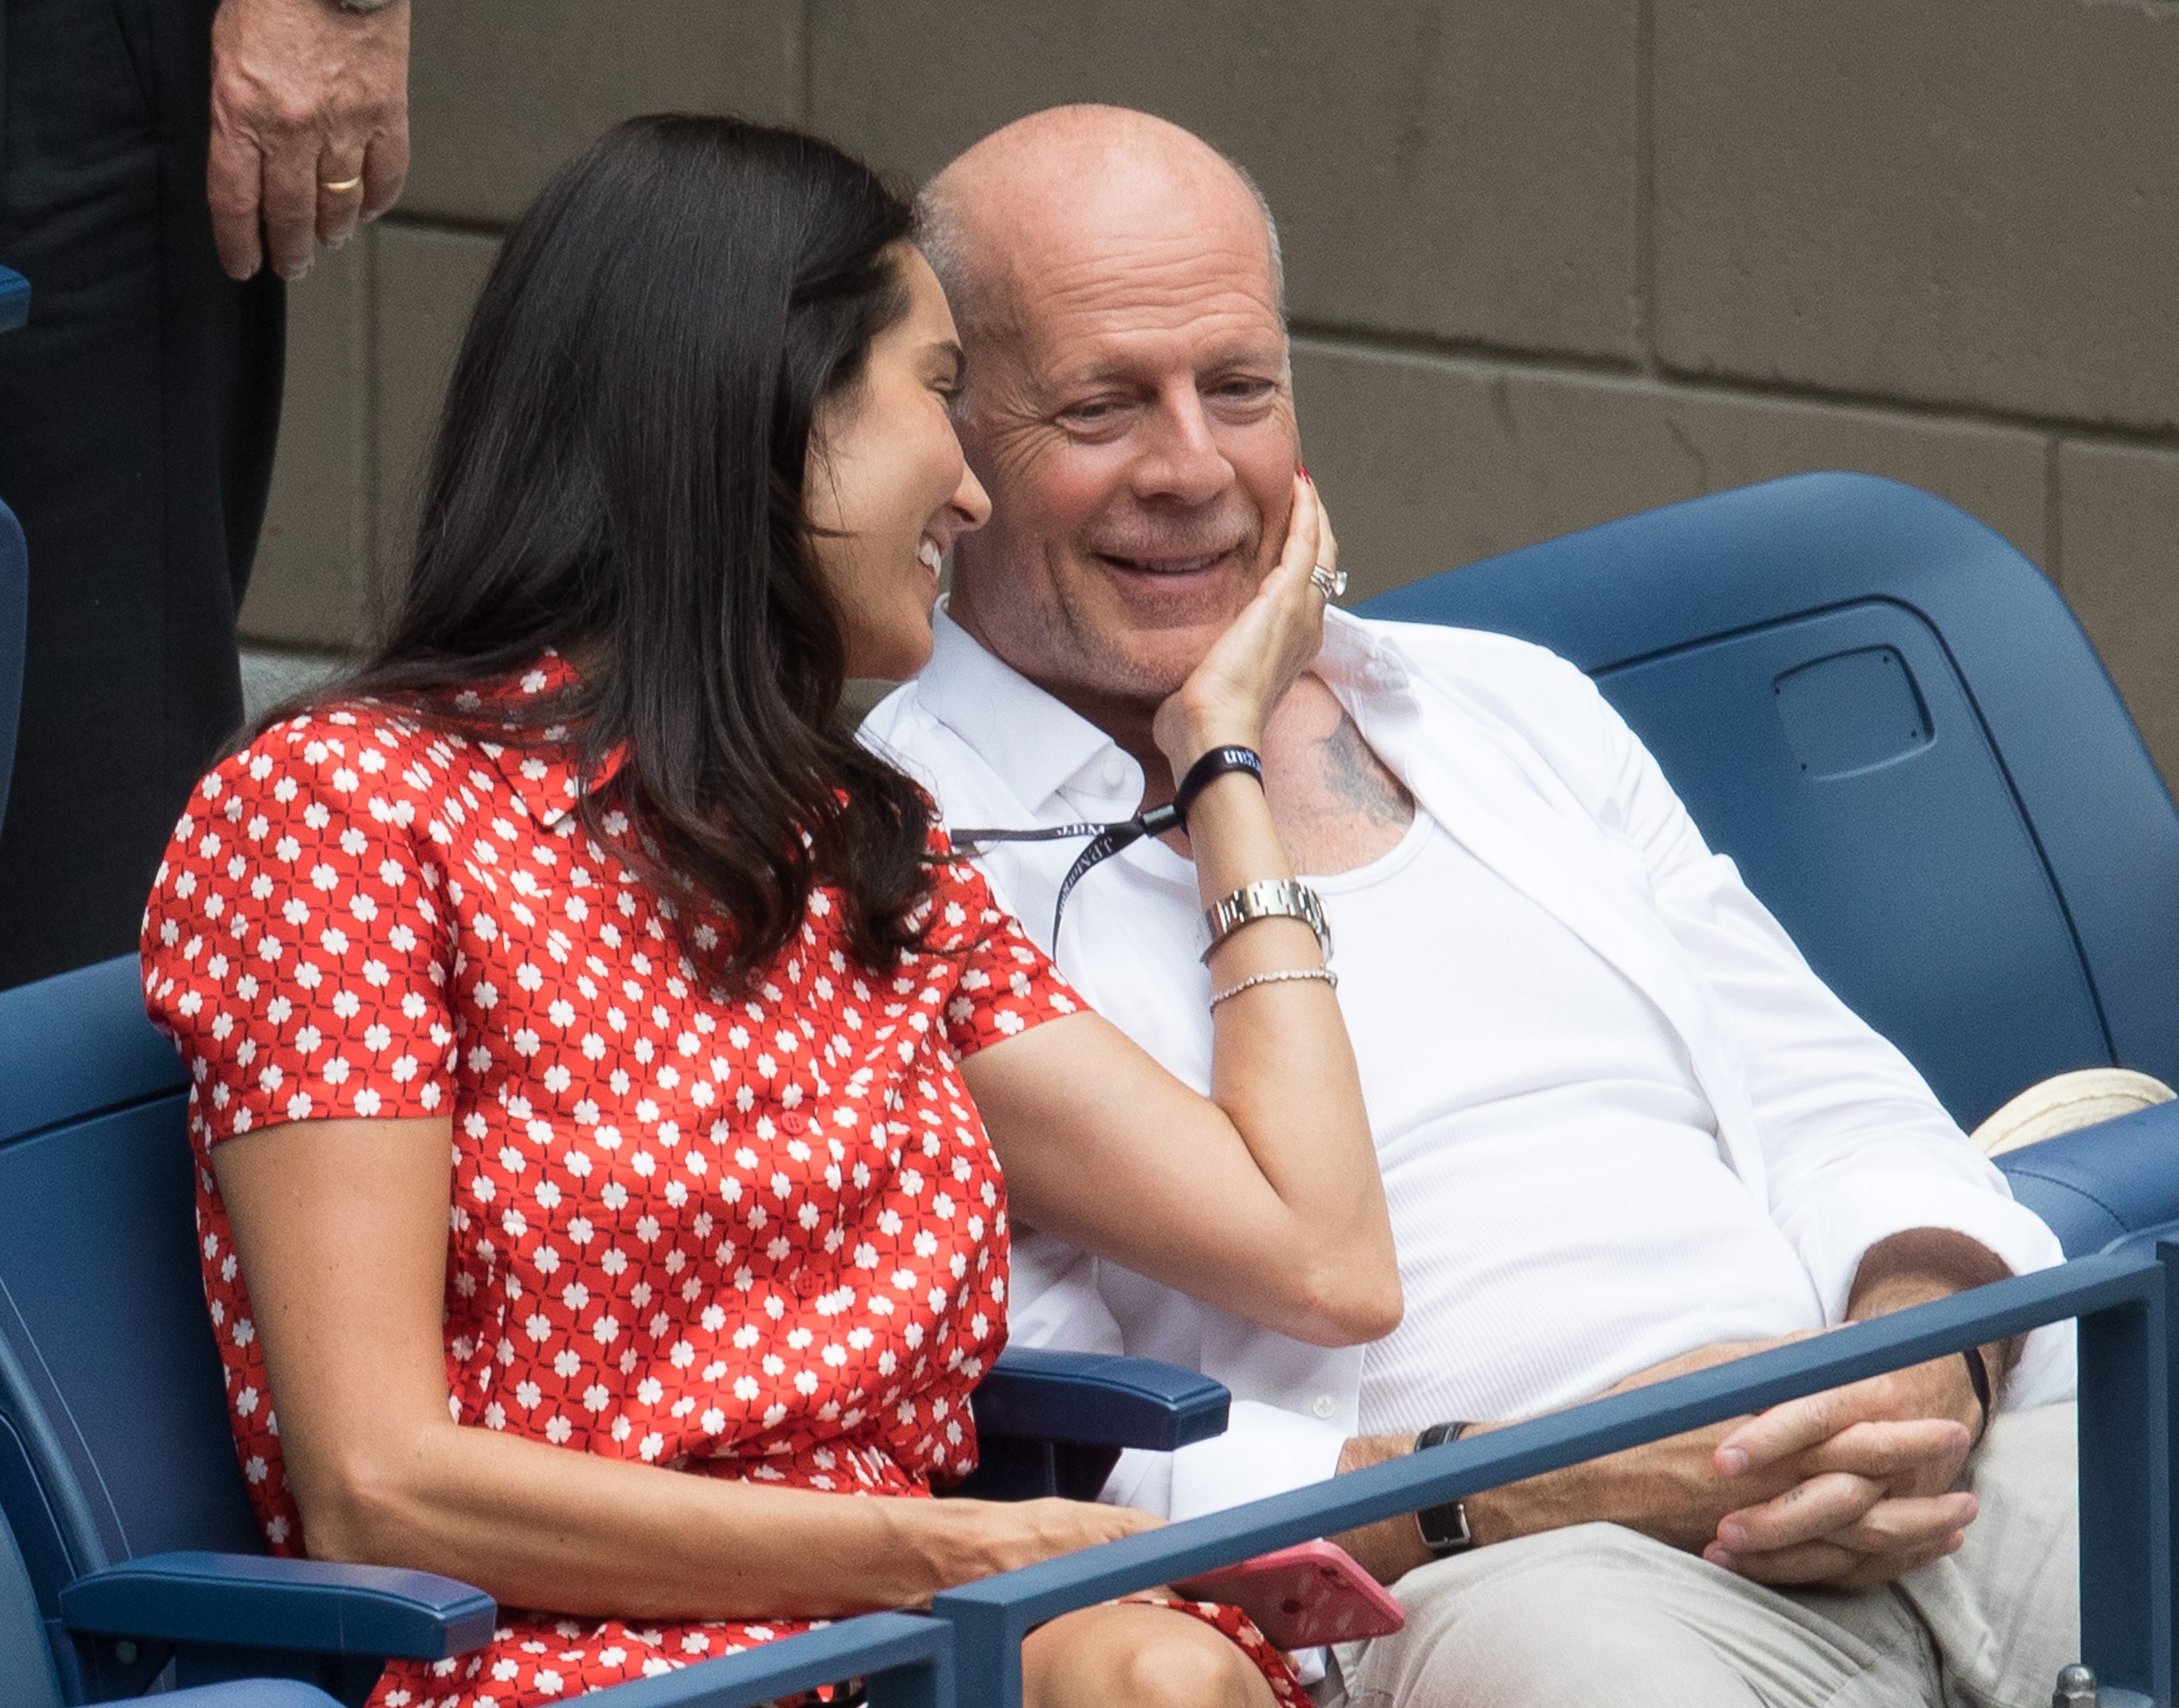 Bruce Willis and Emma Heming spotted at USTA Billie Jean King National Tennis Center on September 9, 2016 in Queens, New York City. / Source: Getty Images